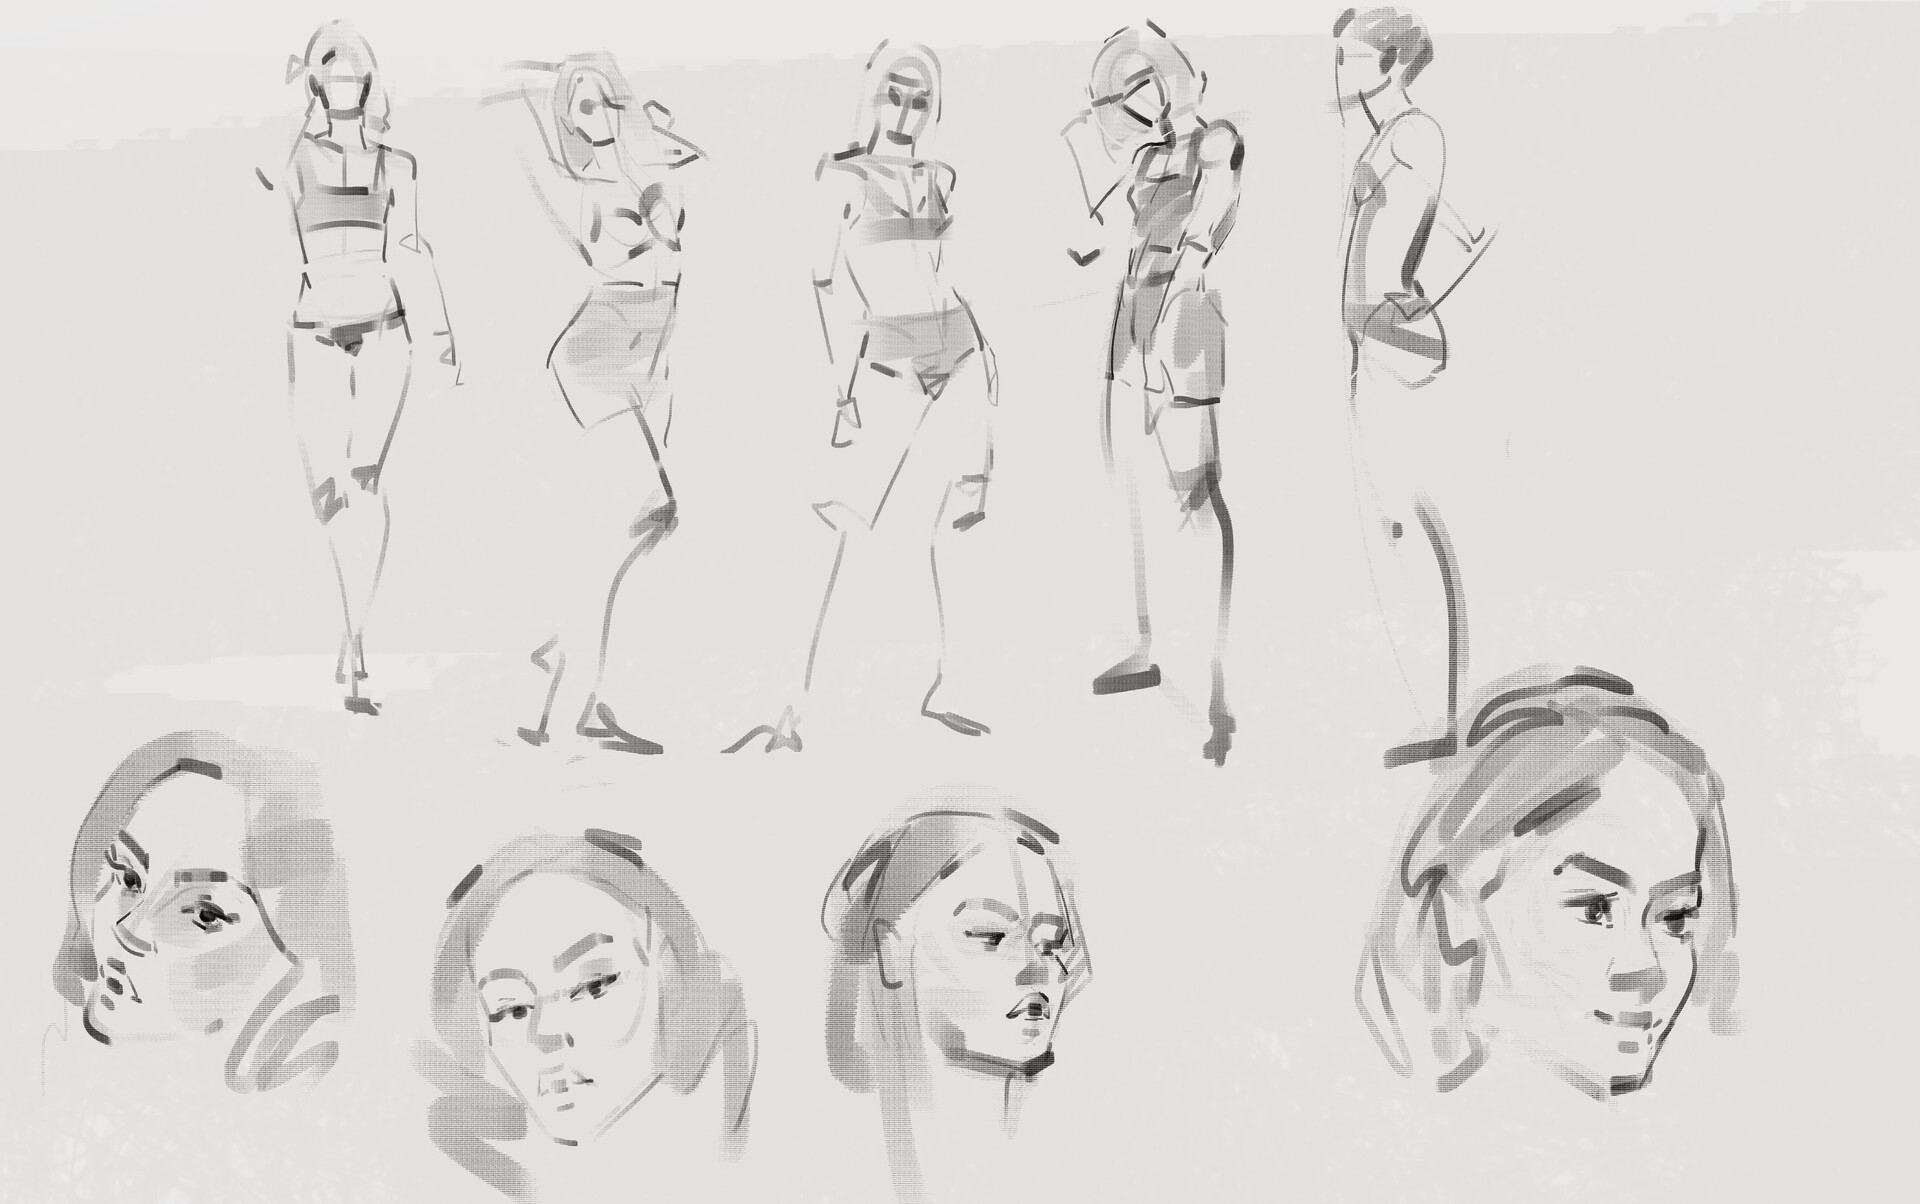 ArtStation - daily sketches ( 매일 드로잉 )